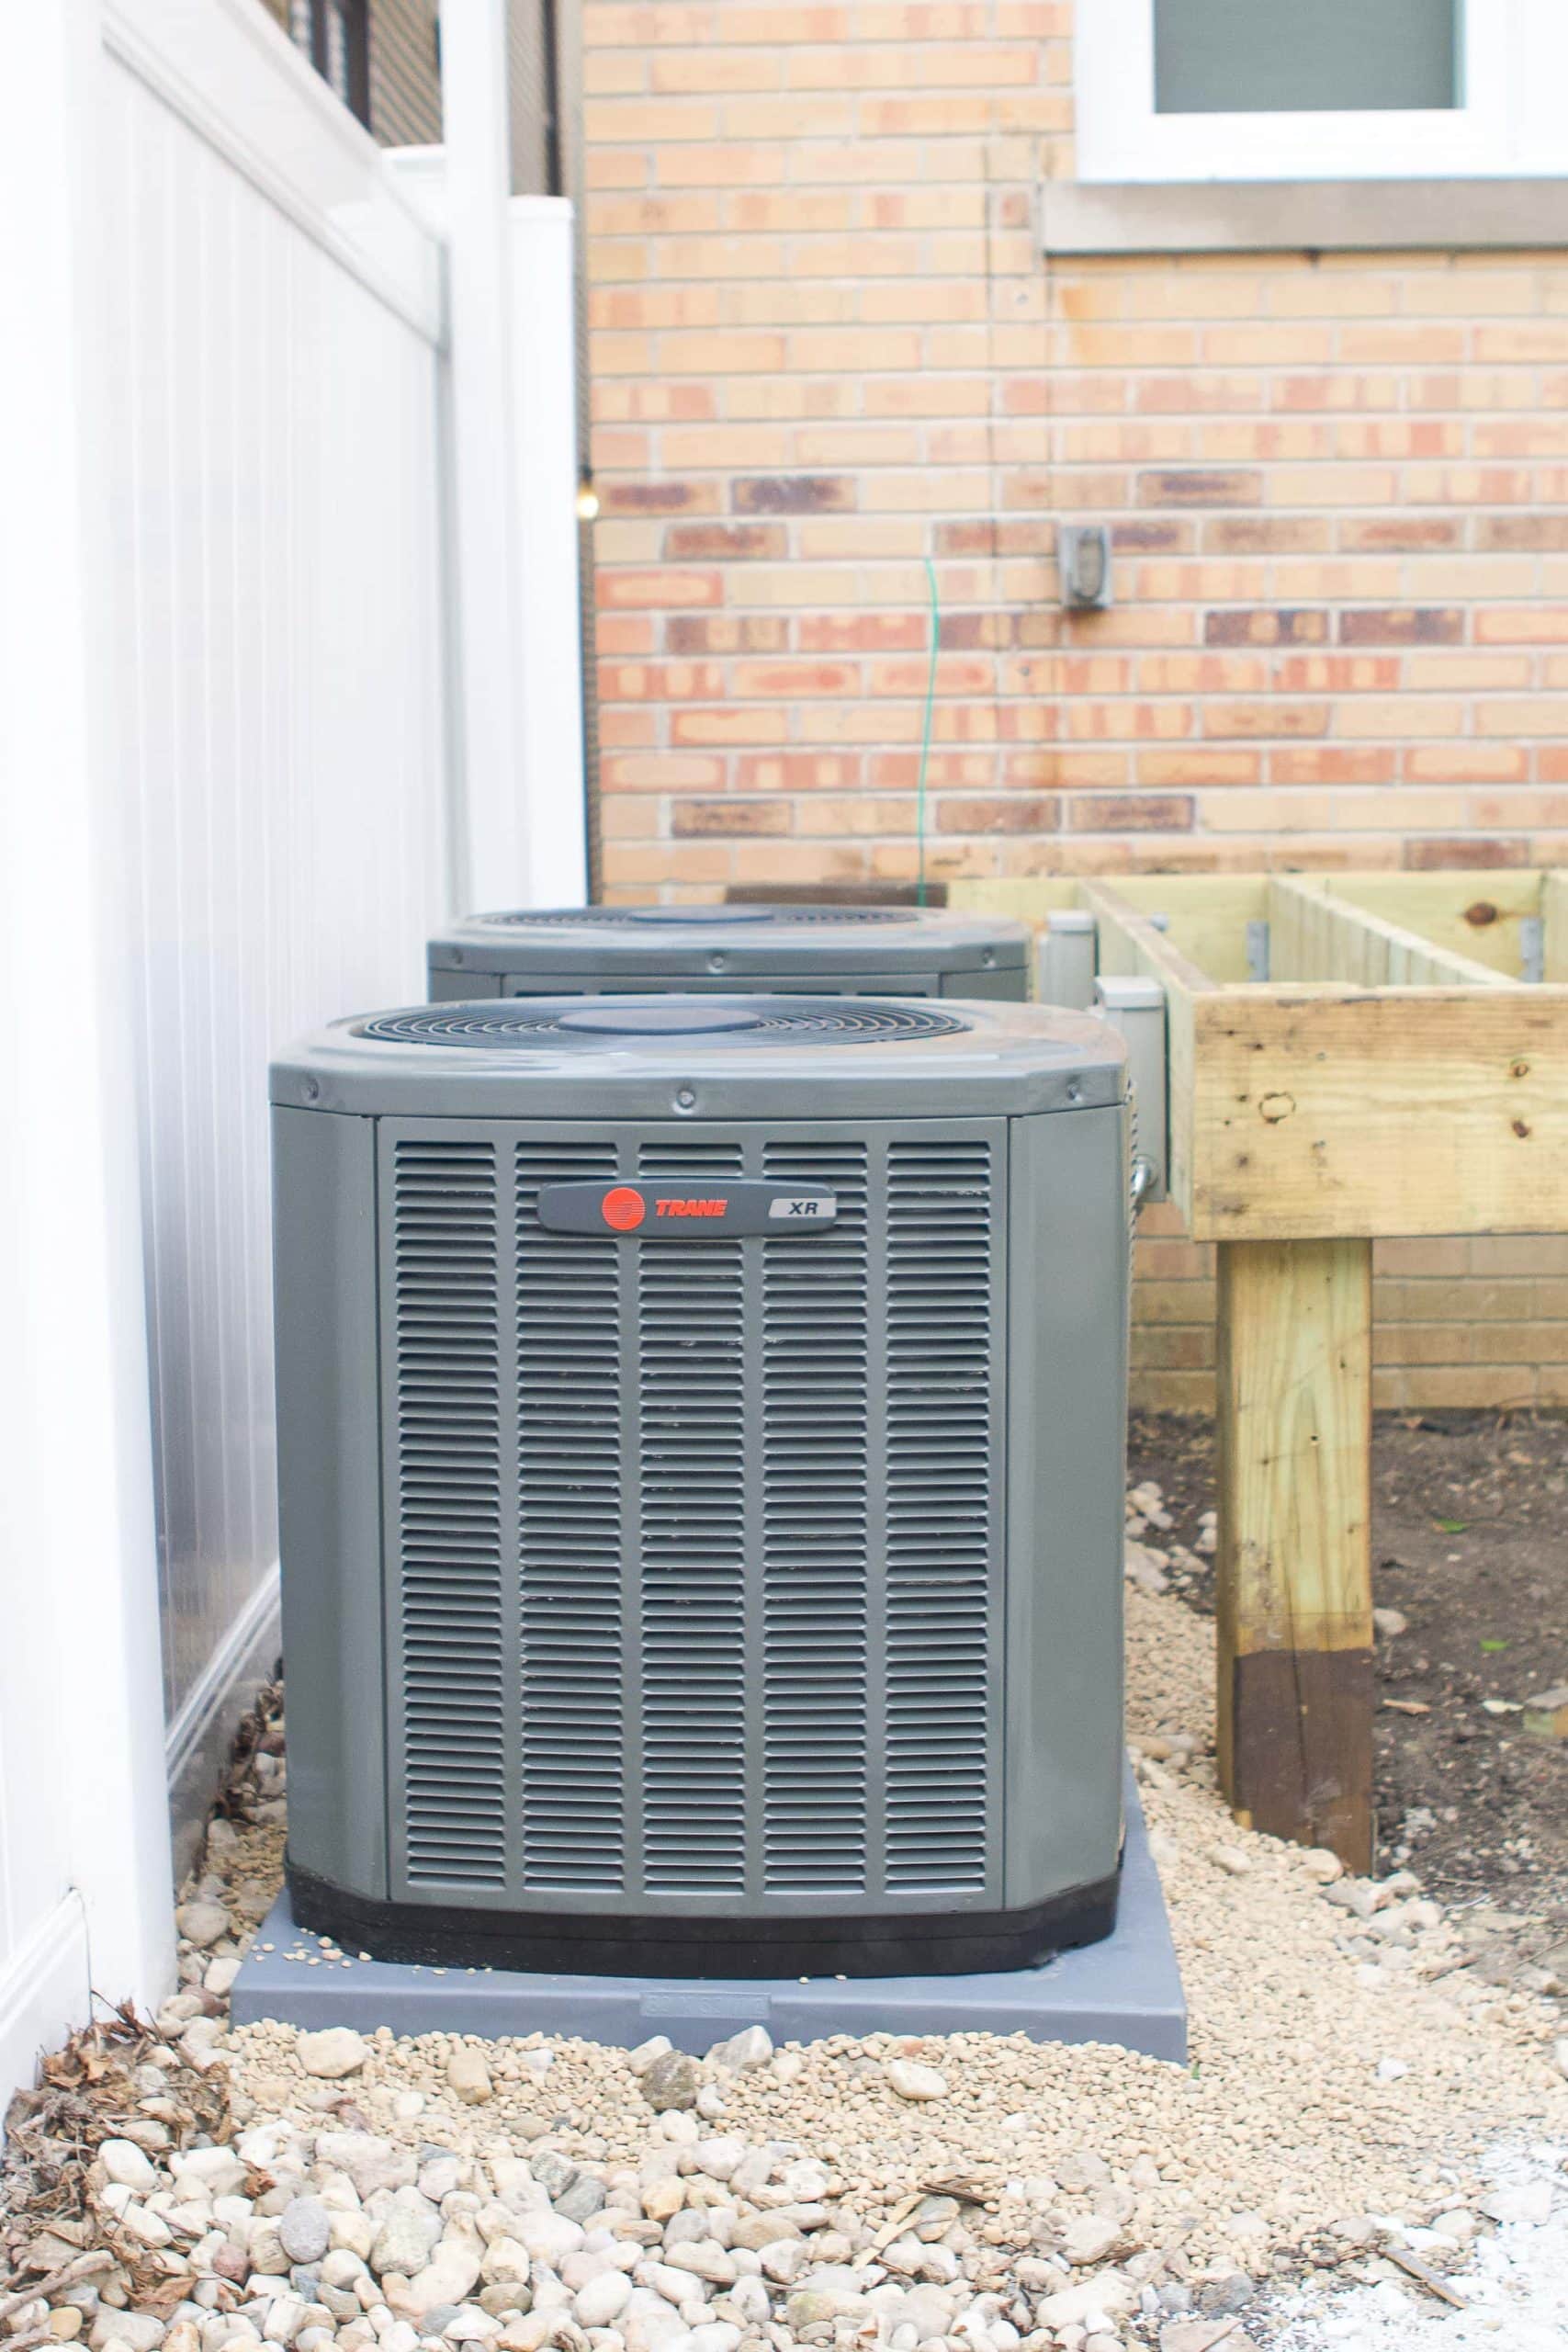 Our new Trane Air conditioners